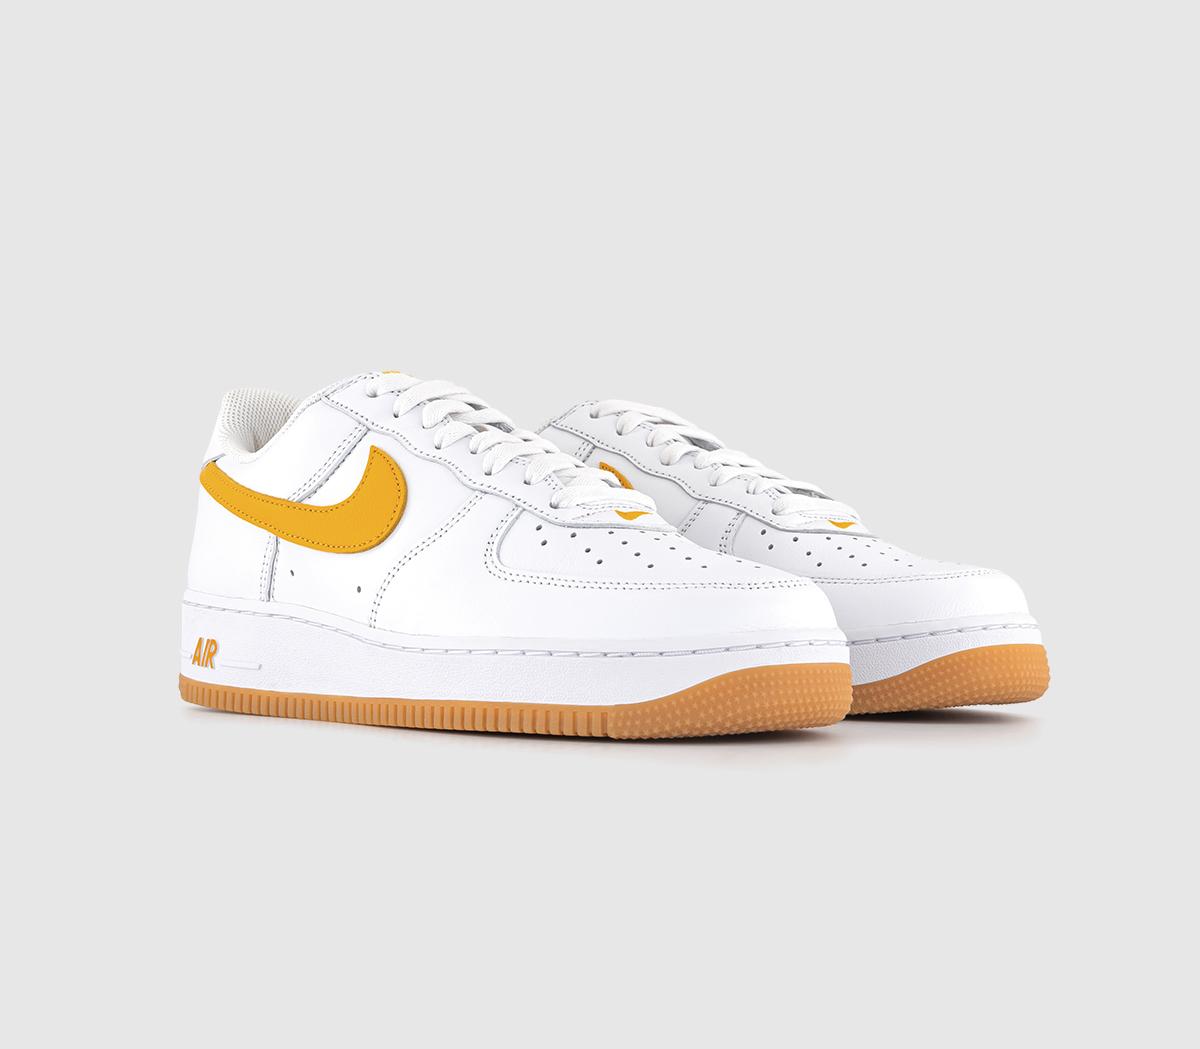 Nike Air Force 1 07 Trainers White University Gold Gum Yellow - Men's ...